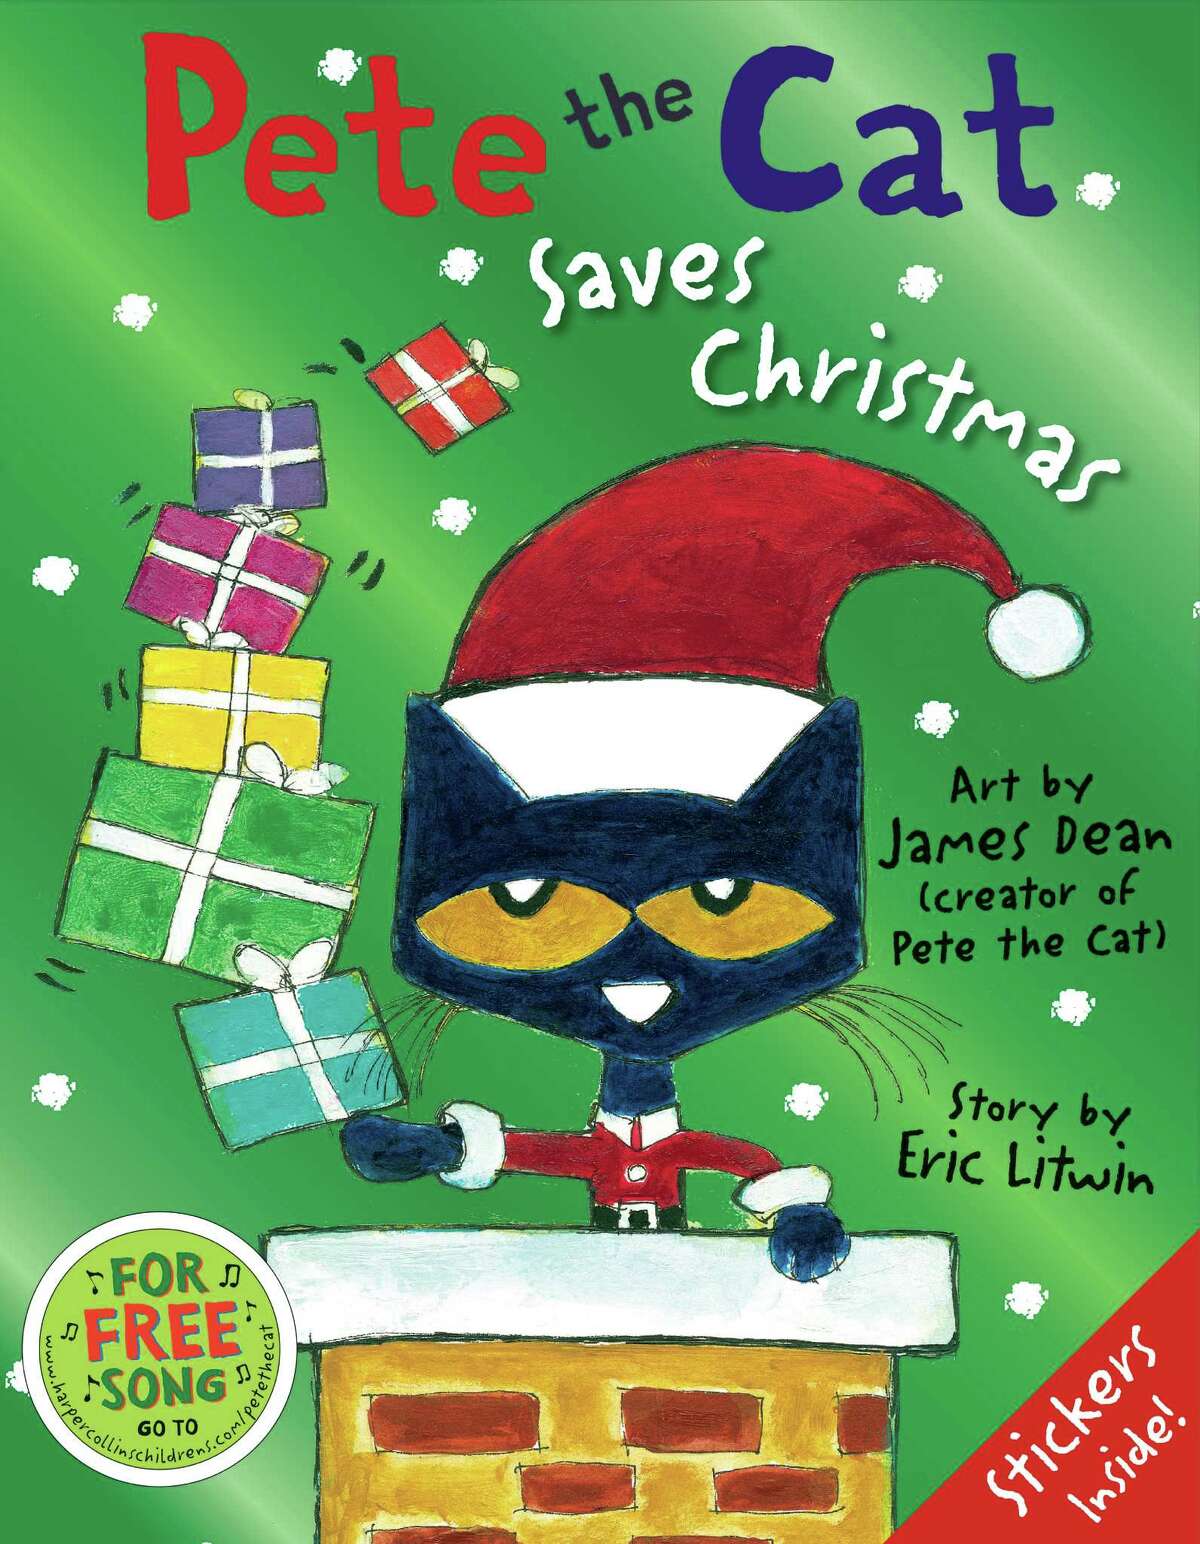 This book cover image released by Harper shows "Pete the Cat Saves Christmas,"created and illustrated by James Dean and story by Eric Litwin. (AP Photo/Harper)